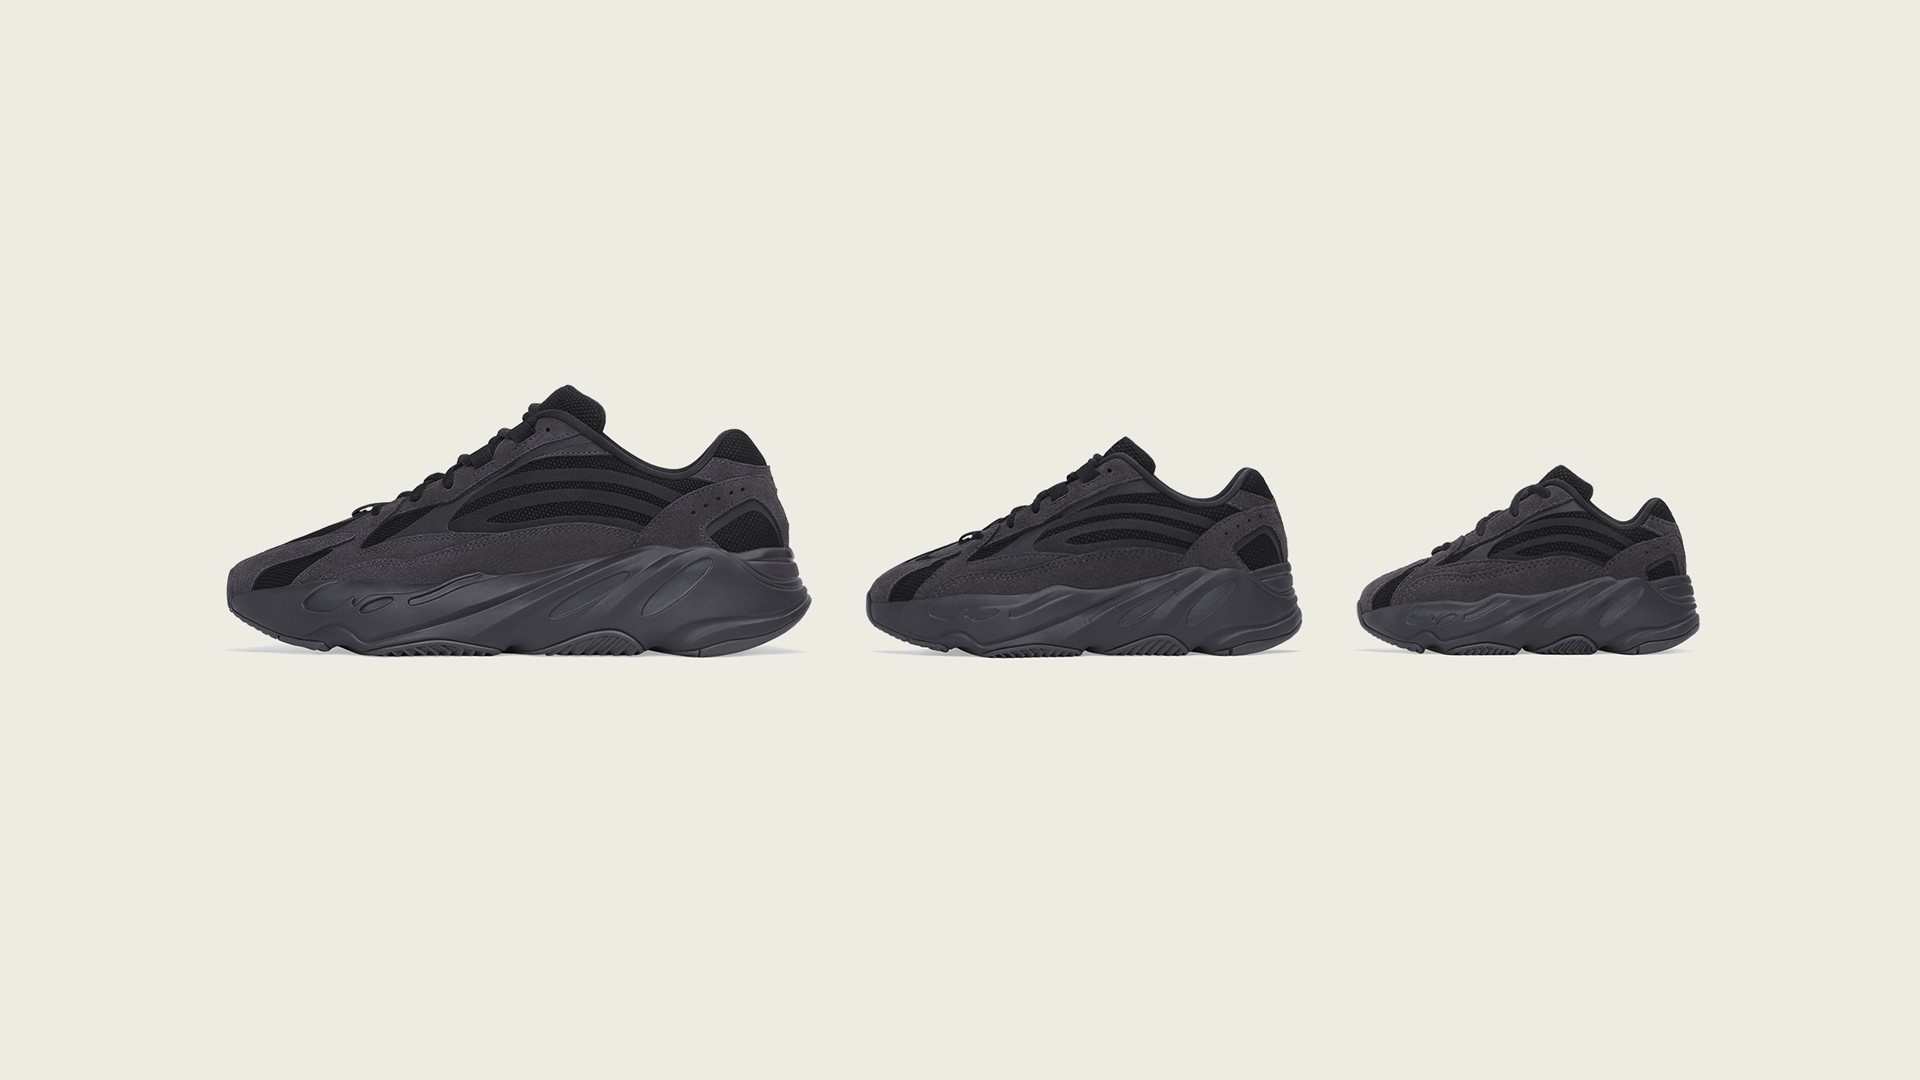 Kanye West Release Three New Yeezy Boosts